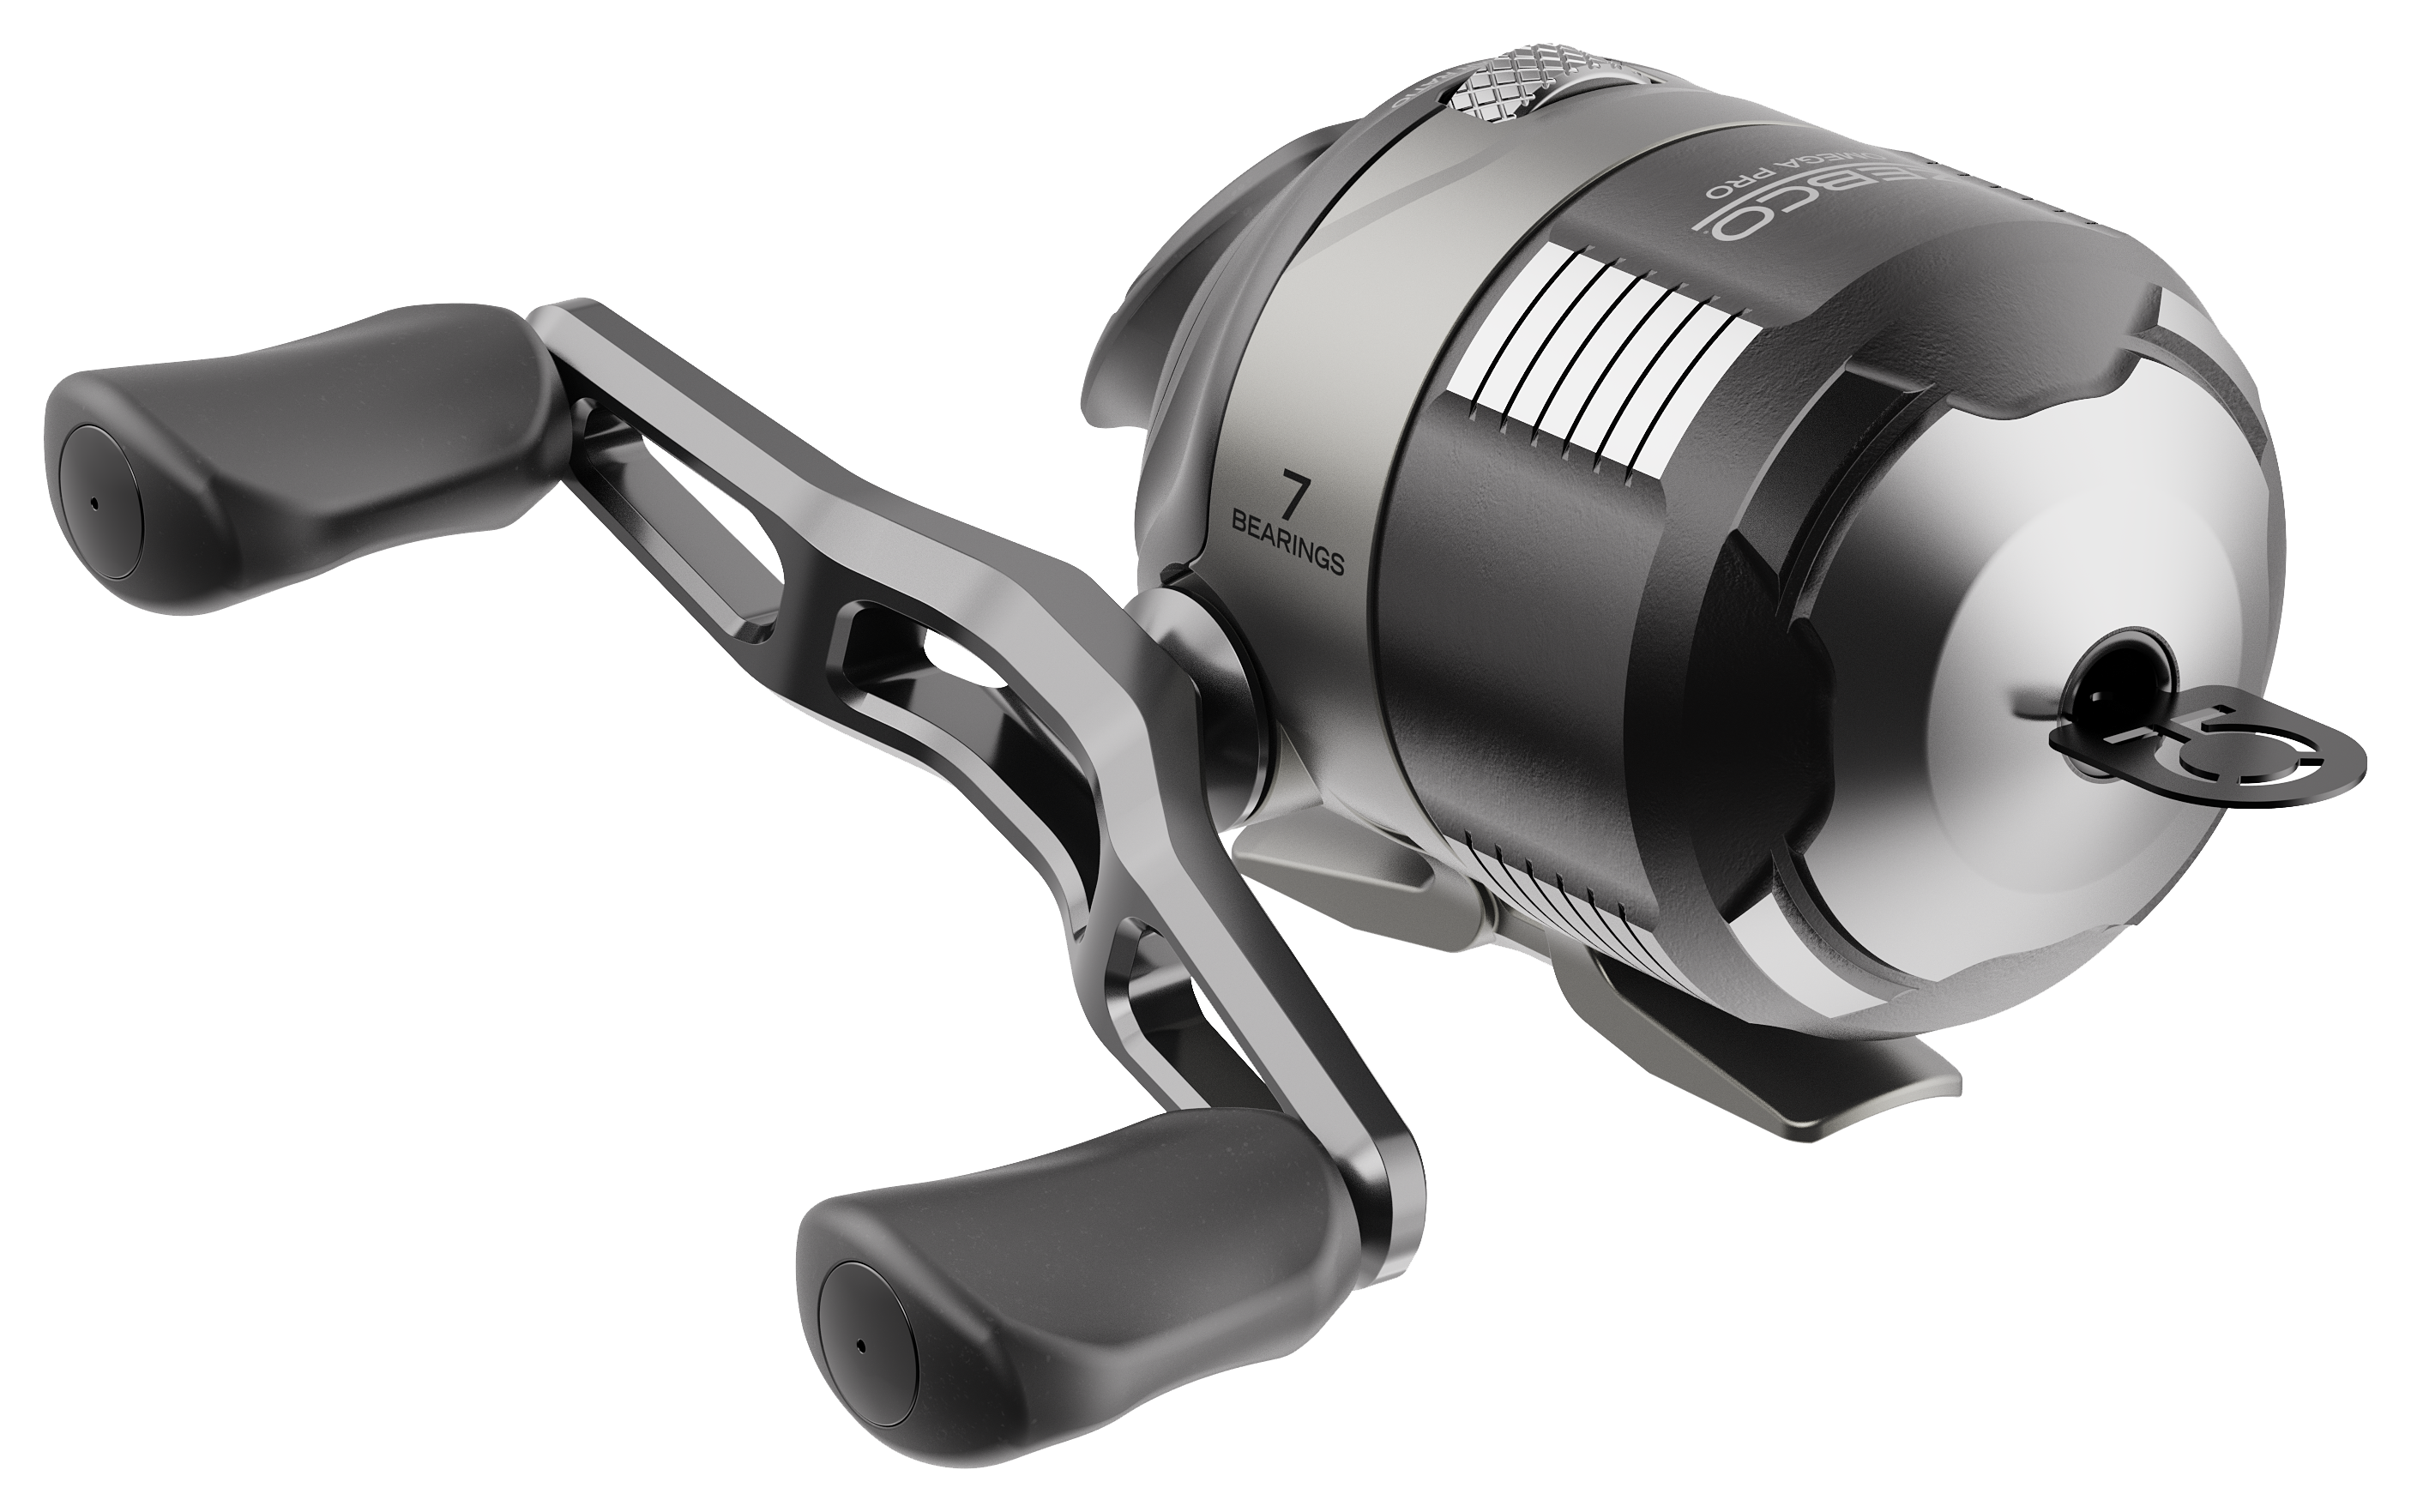 Zebco 33 Platinum Spincast Fishing Reel, 4+1 Bearings with a Smooth and  Powerful 4.7:1 Gear Ratio and Instant Anti-Reverse Clutch with a Smooth  Dial-Adjustable Drag, Silver in Dubai - UAE